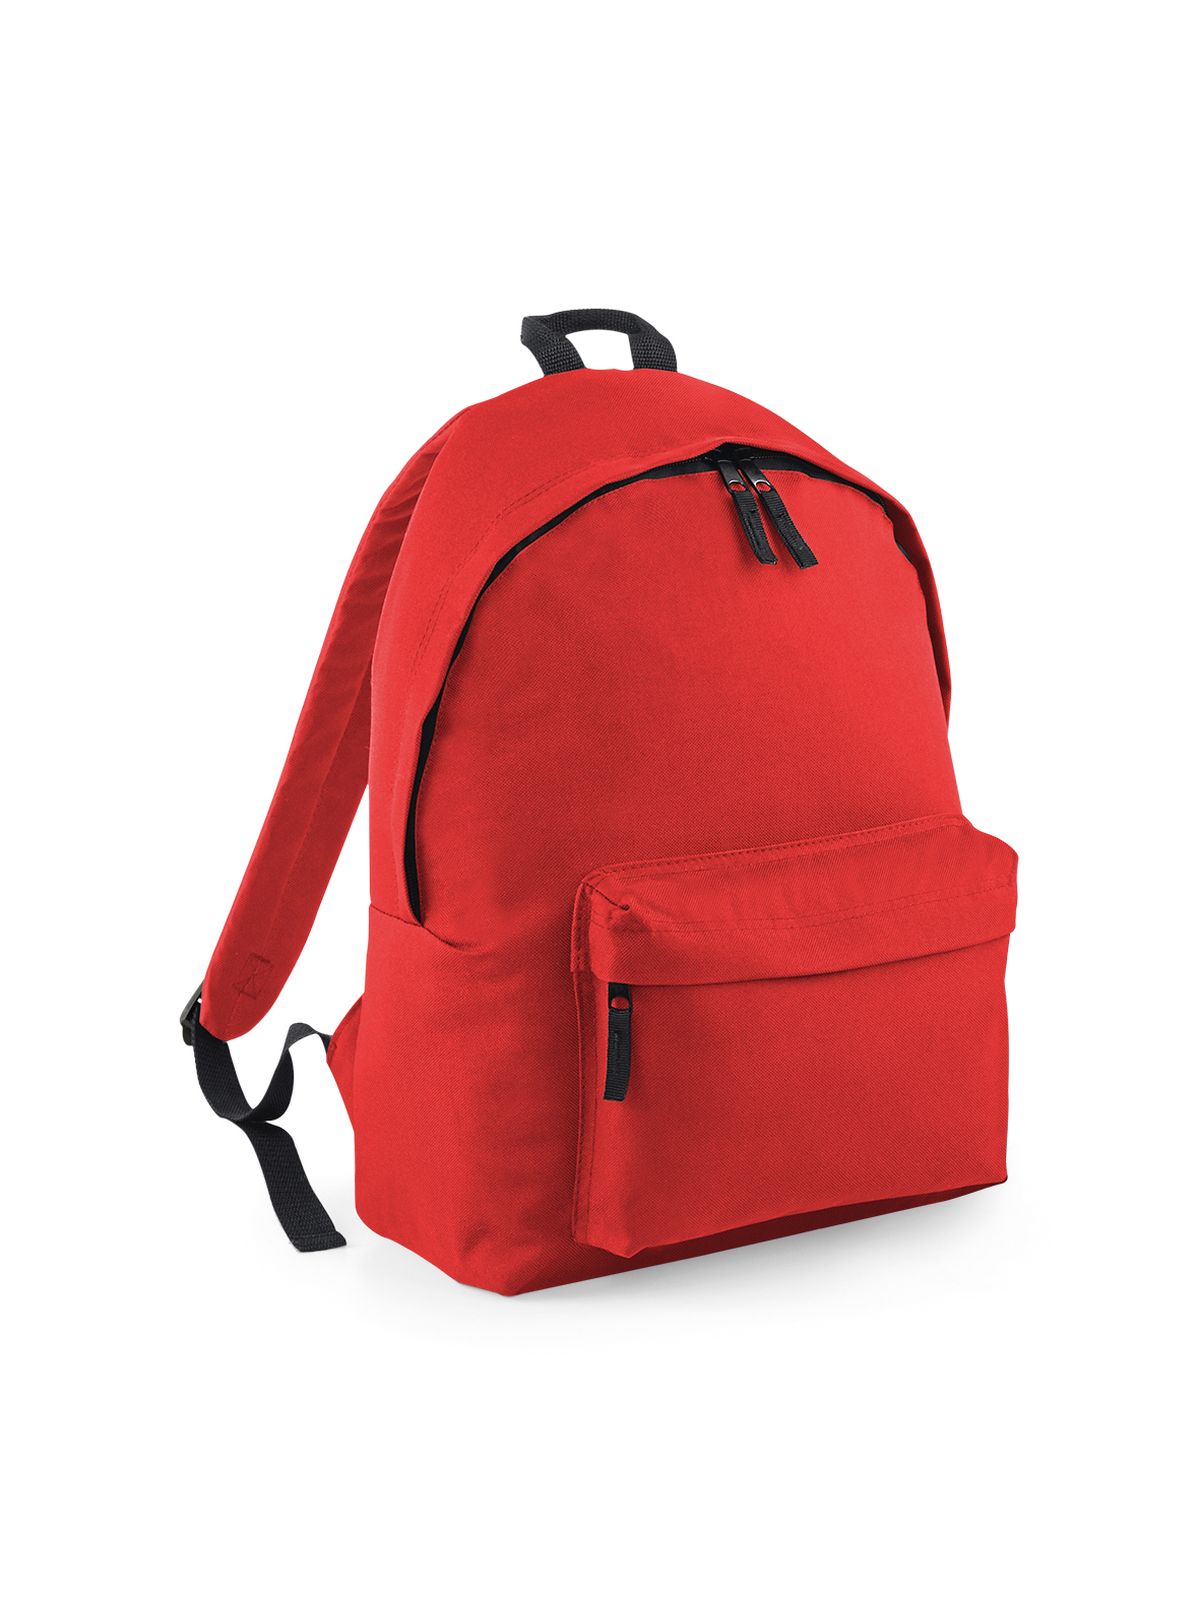 junior-fashion-backpack-bright-red.webp